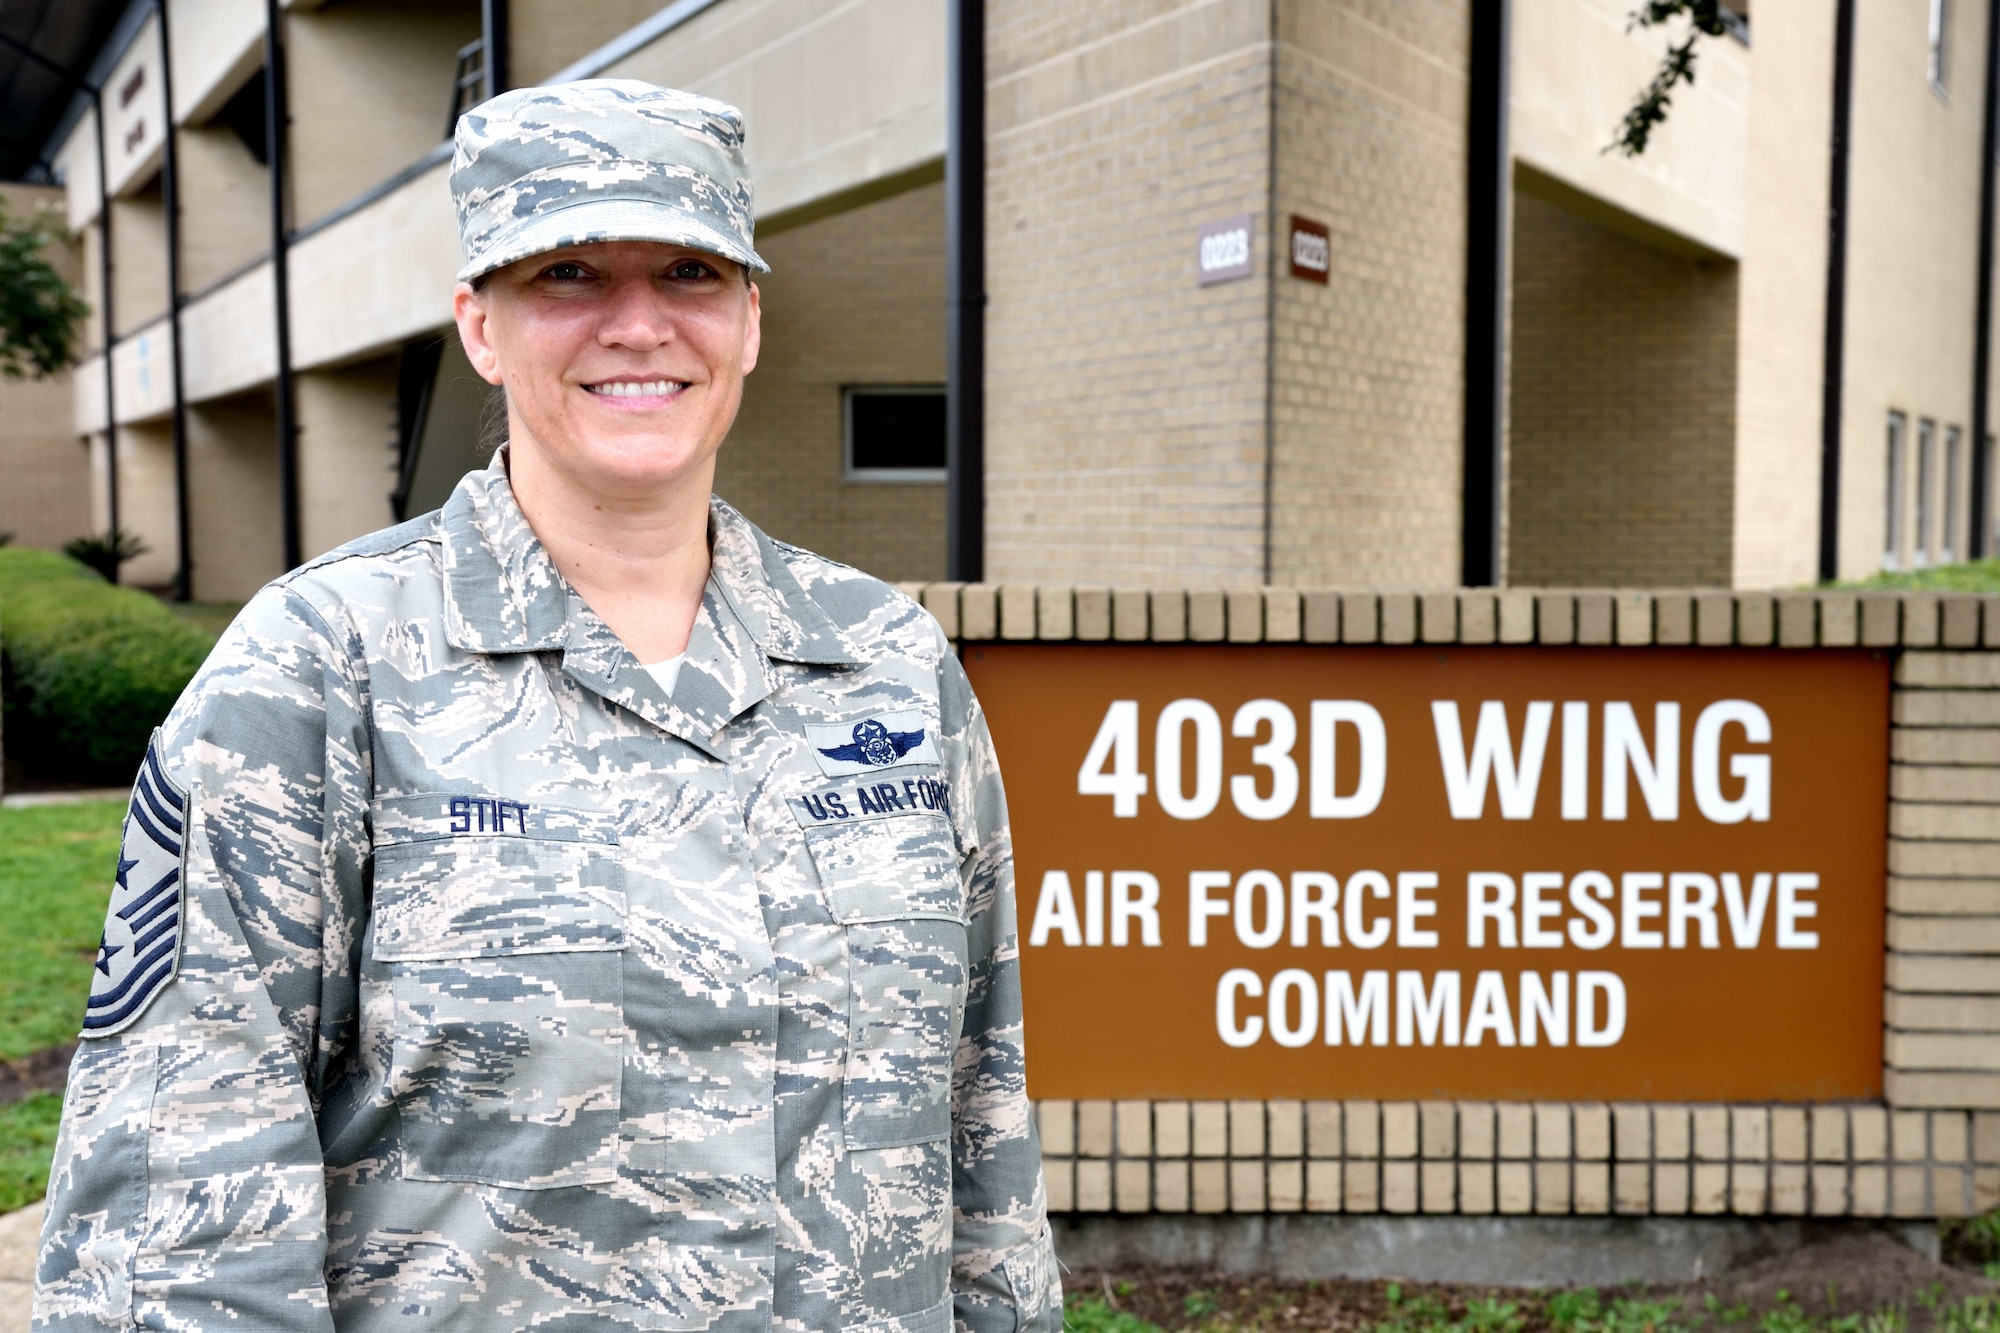 Chief Master Sgt. Amanda Stift was selected in April 2018 to be the 403rd Wing’s new command chief master sergeant at Keesler Air Force Base, Mississippi. She is scheduled to begin serving officially in that role Nov. 1, 2018. (U.S. Air Force photo by Tech. Sgt. Ryan Labadens)